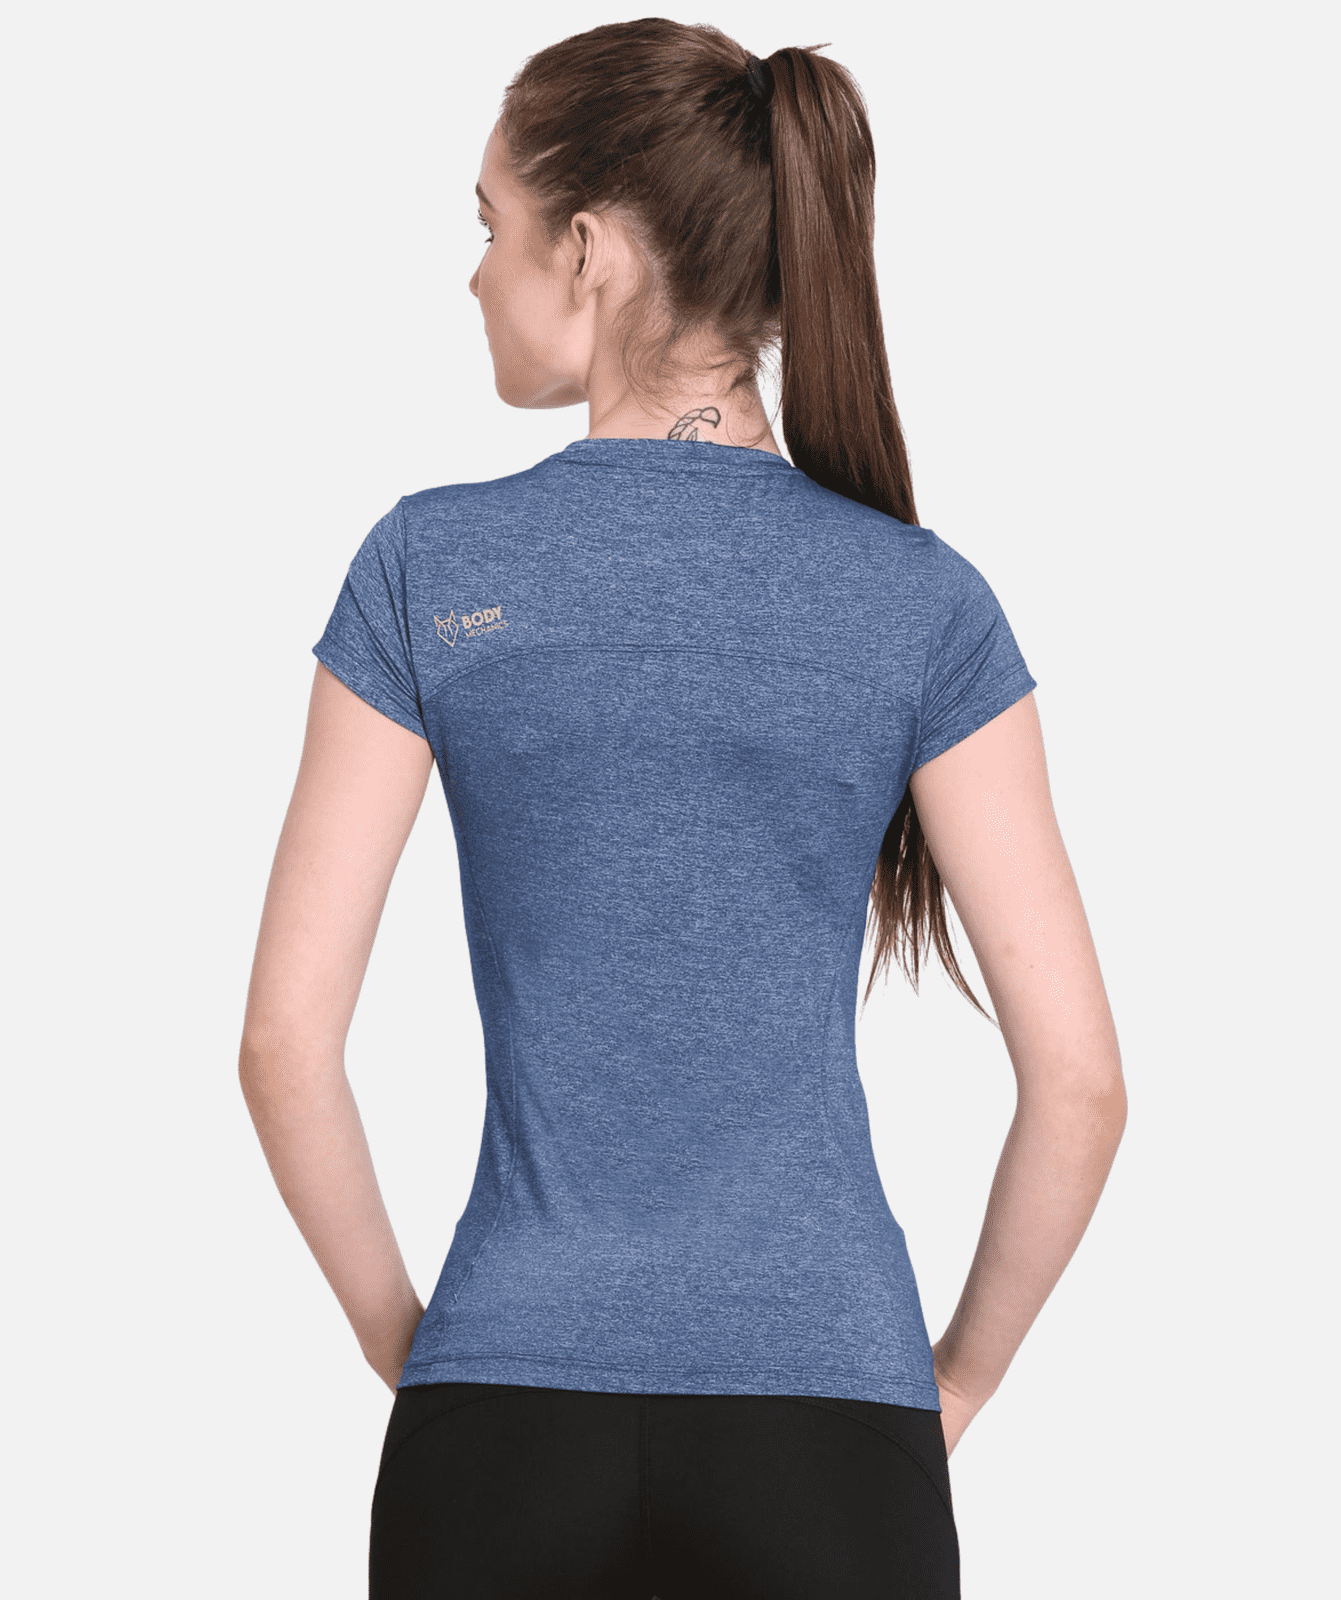 Yoga Top for Women | Cloud Nylon Fabric | Soft and Smooth Women's Upper